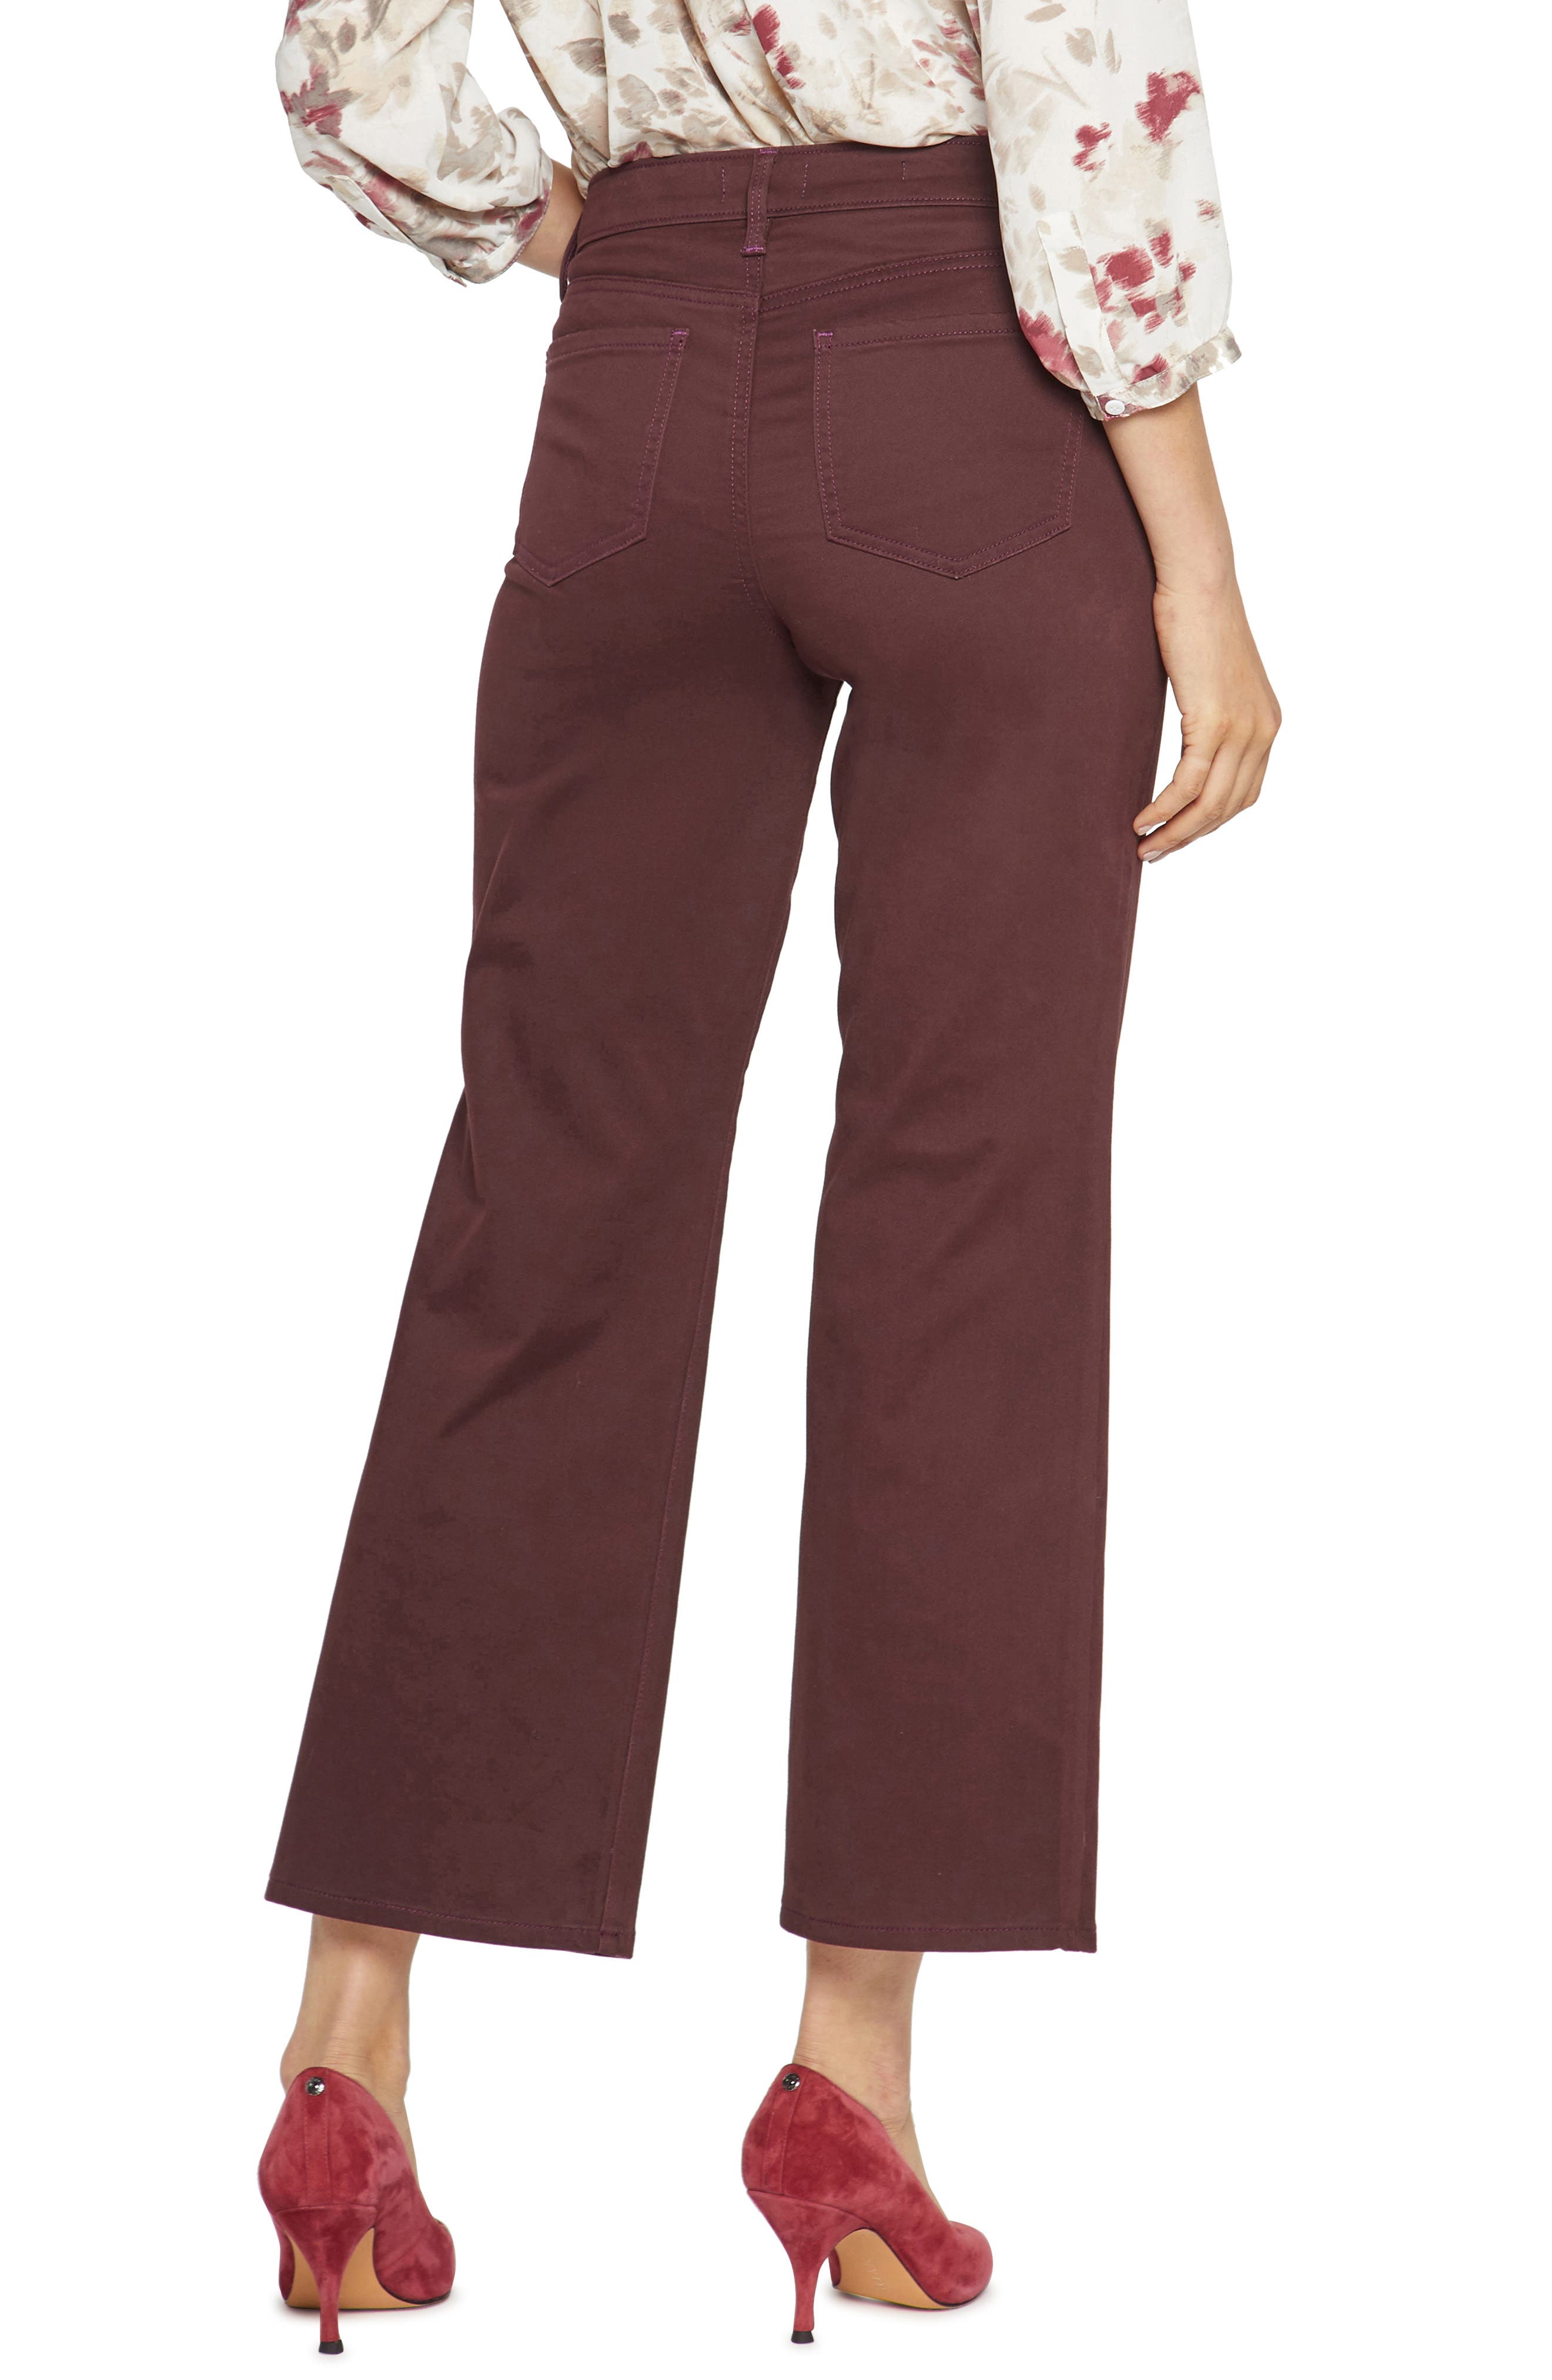 NYDJ Sateen Relaxed Flare Jeans in Eggplant